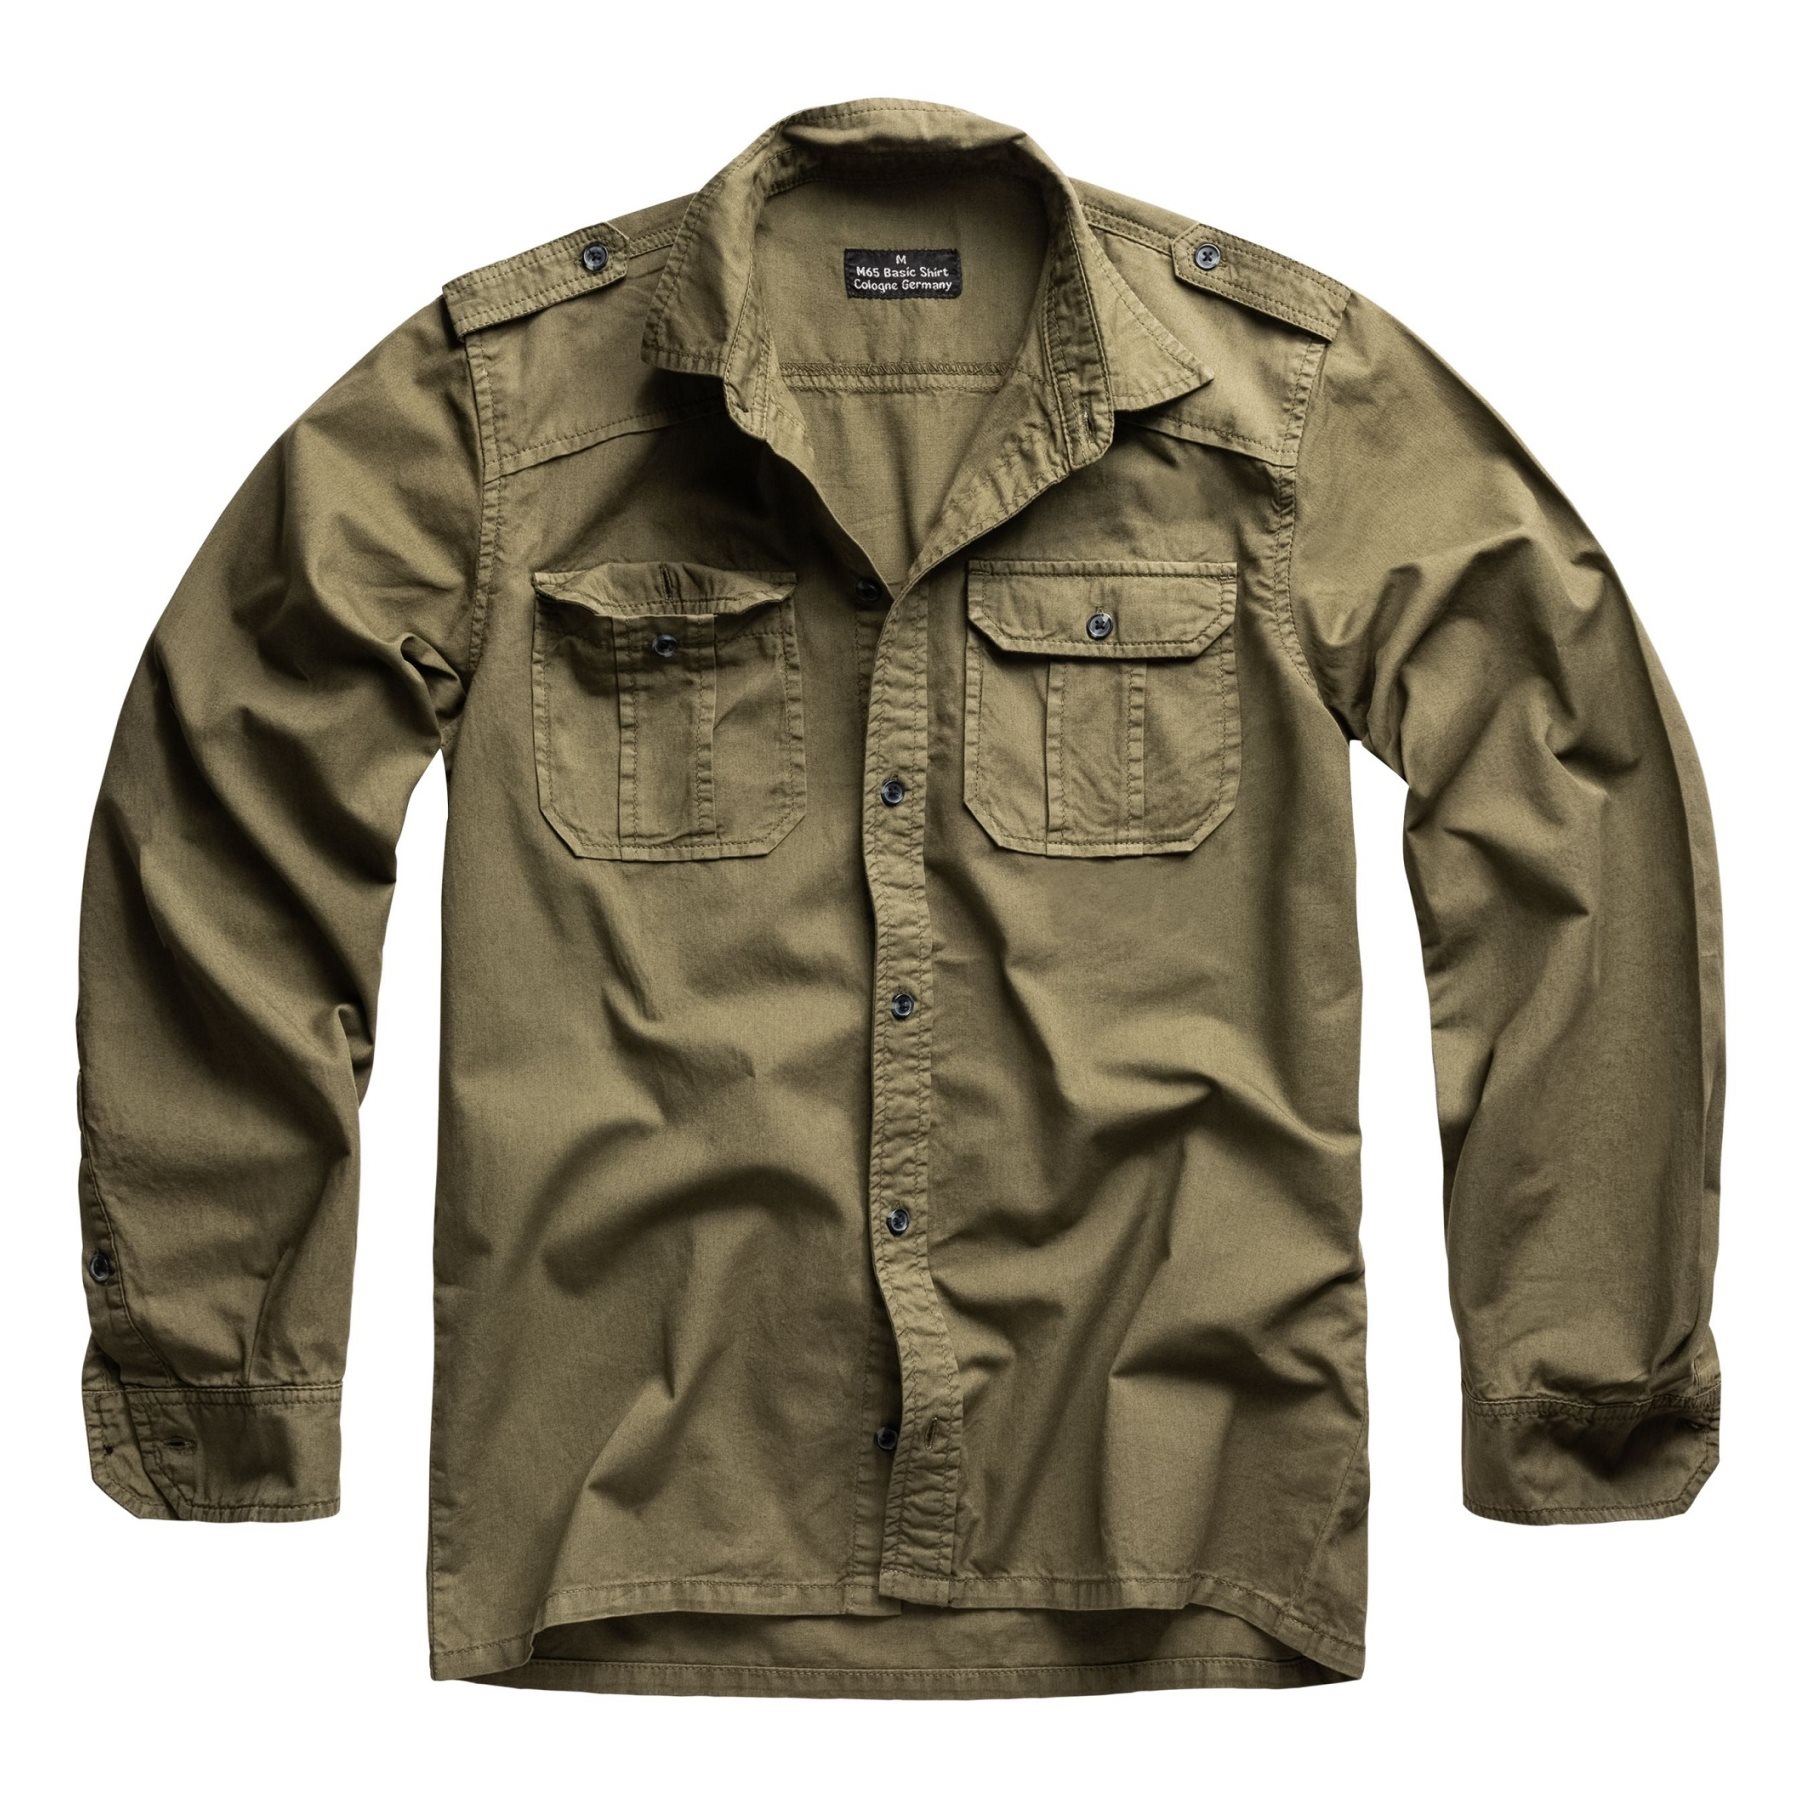 M65 BASIC shirt with long sleeves OLIVE SURPLUS 06-3593-01 L-11